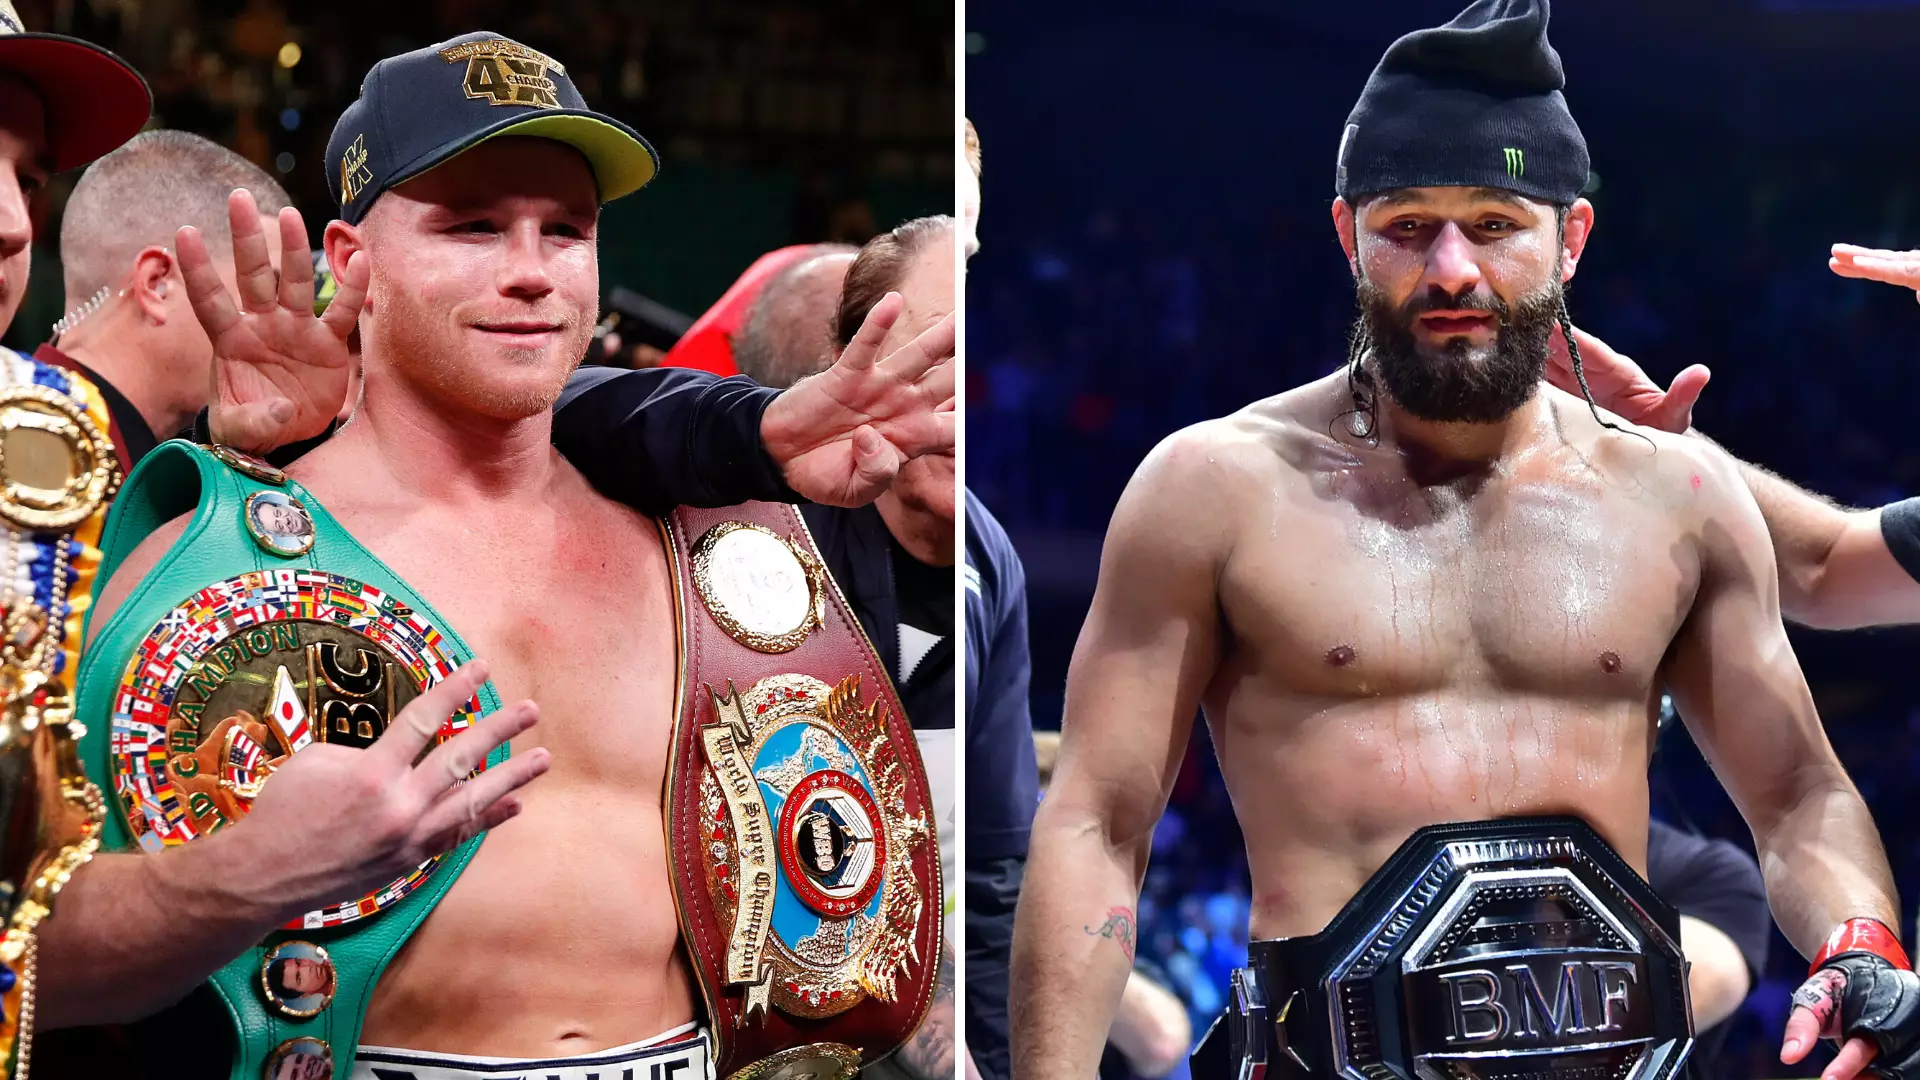 Jorge Masvidal Calls Out Canelo Alvarez And Wants To 'Break His Face' In A Boxing Match